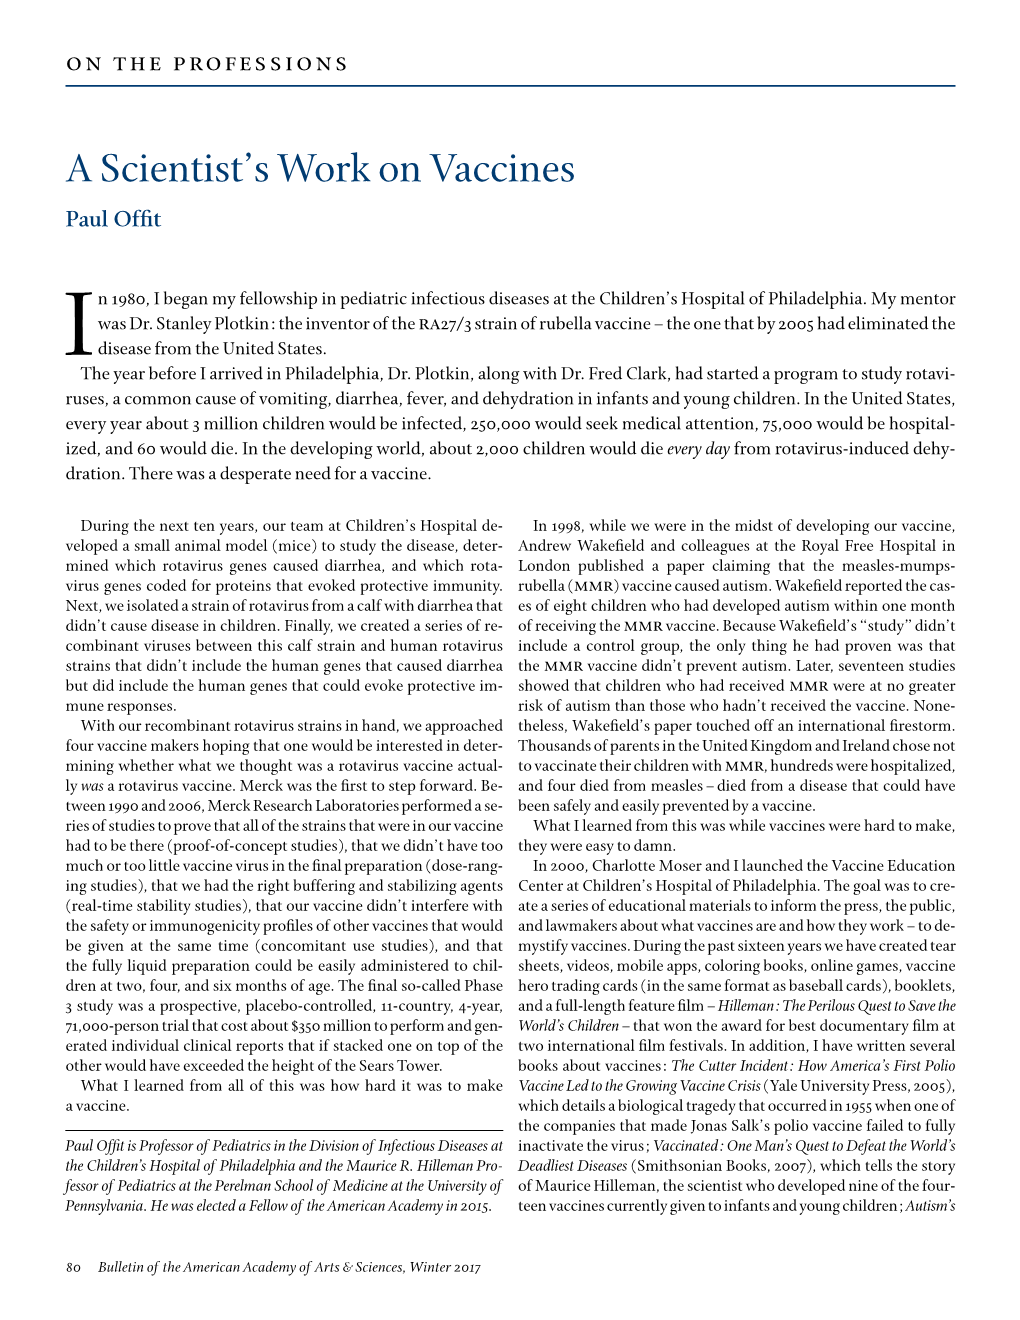 A Scientist's Work on Vaccines